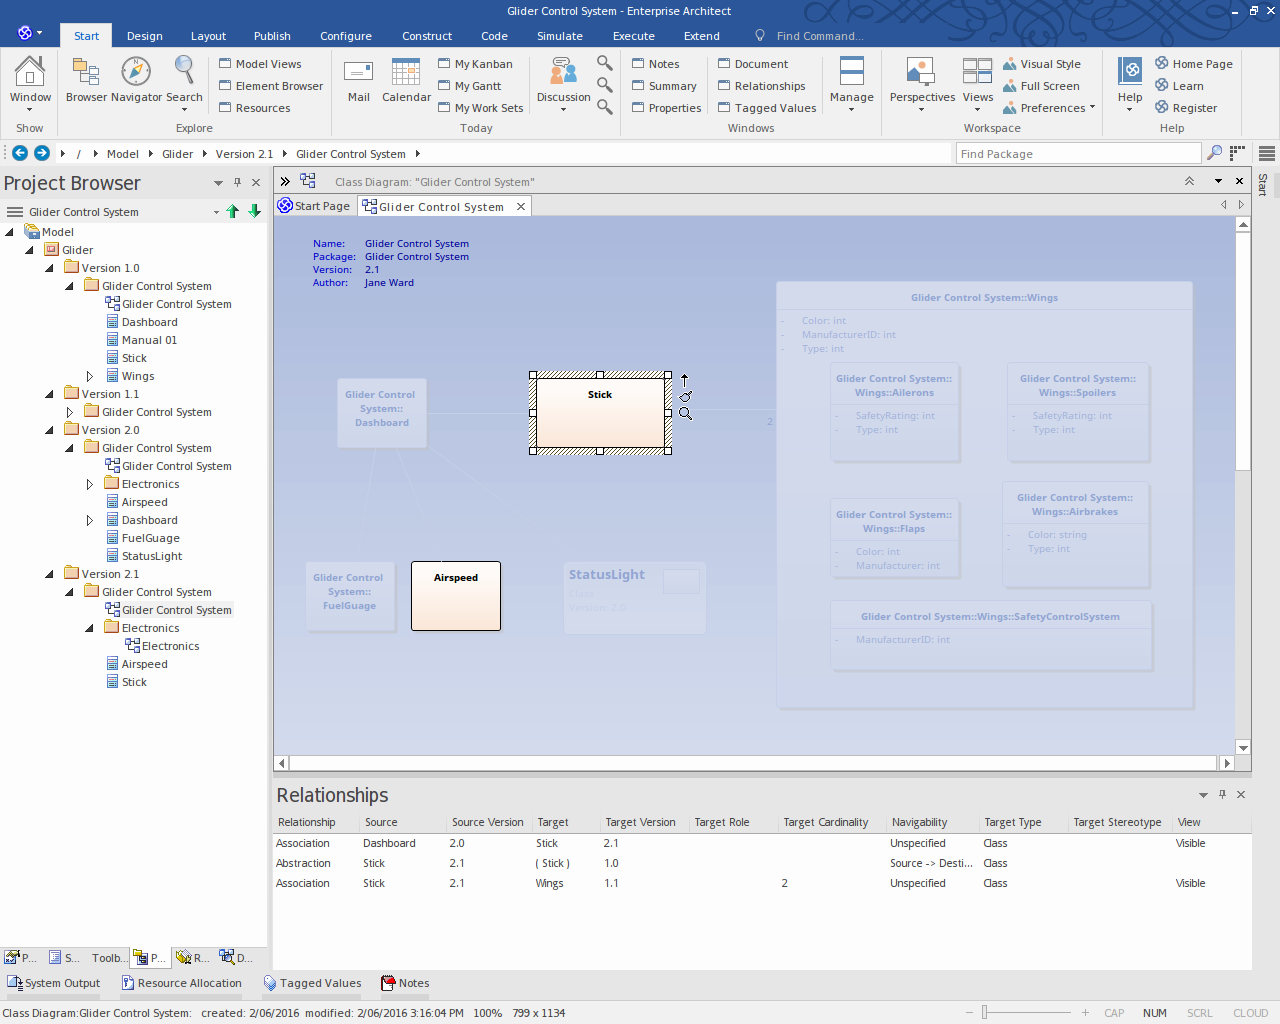 An example of Time Aware Modeling in Sparx Systems Enterprise Architect.